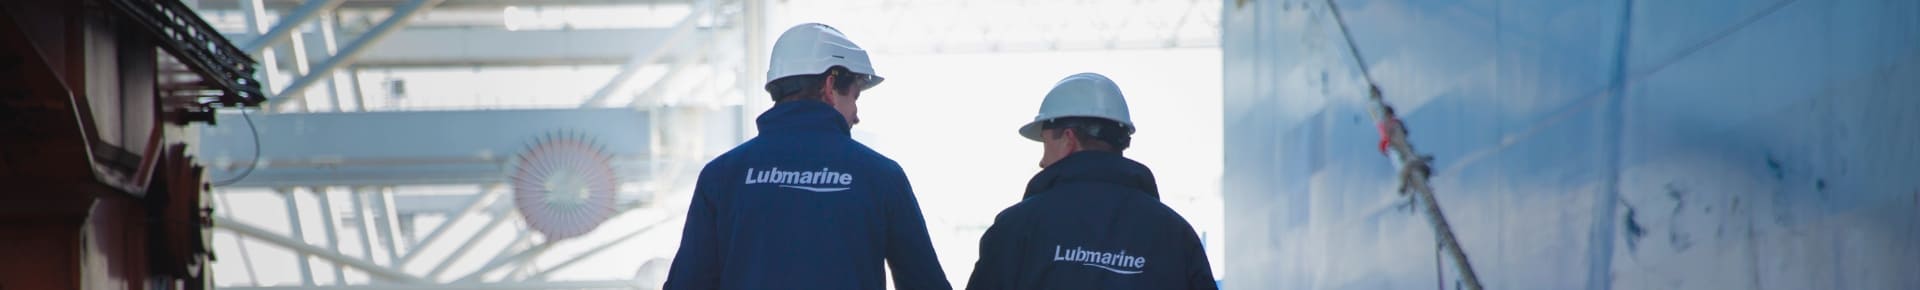 Two Lubmarine workers walking ont the docs